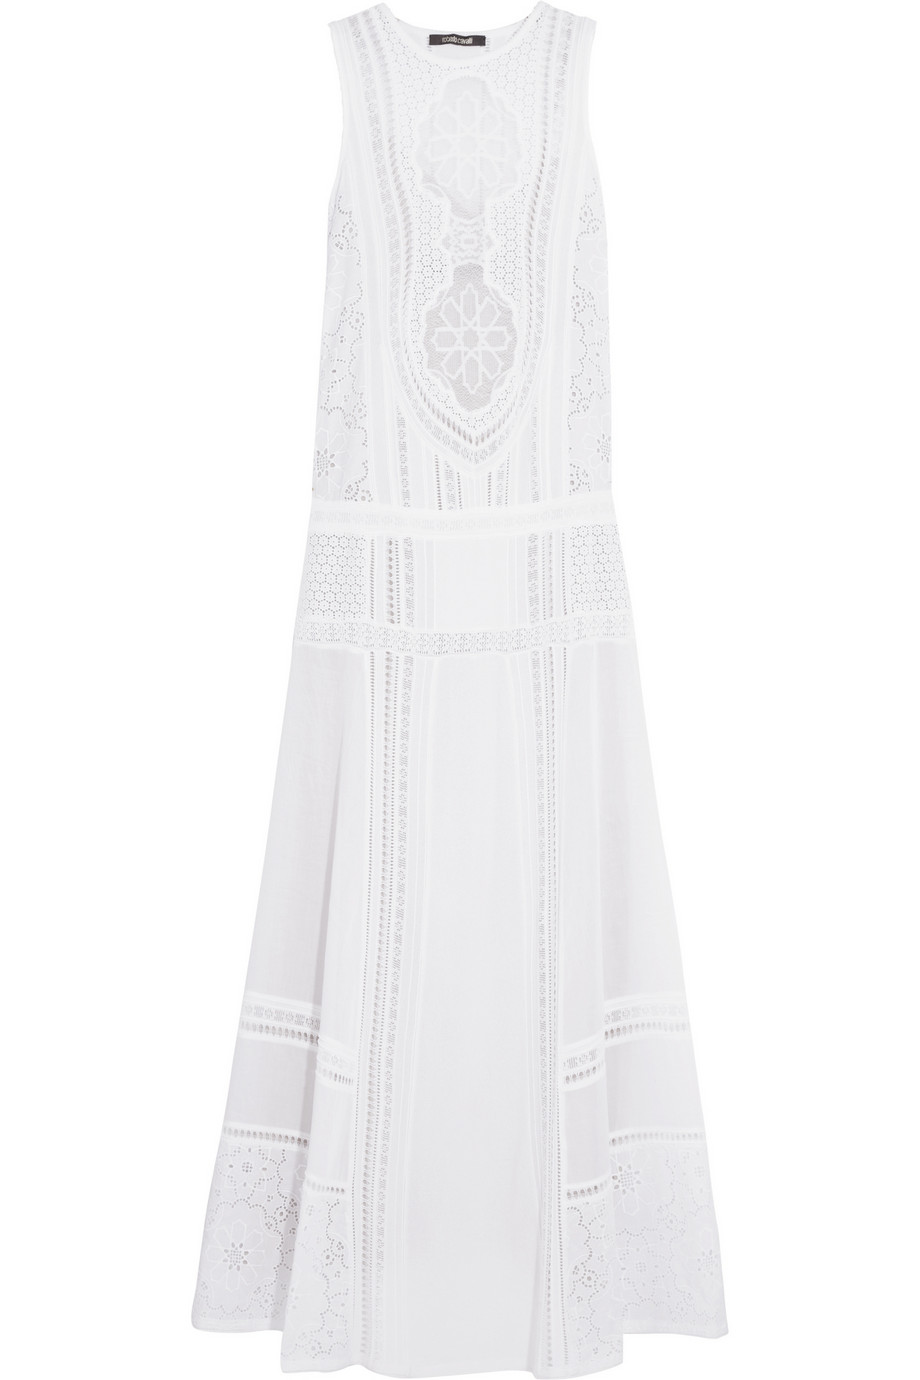 Lyst - Roberto Cavalli Cotton and Crocheted Lace Maxi Dress in White